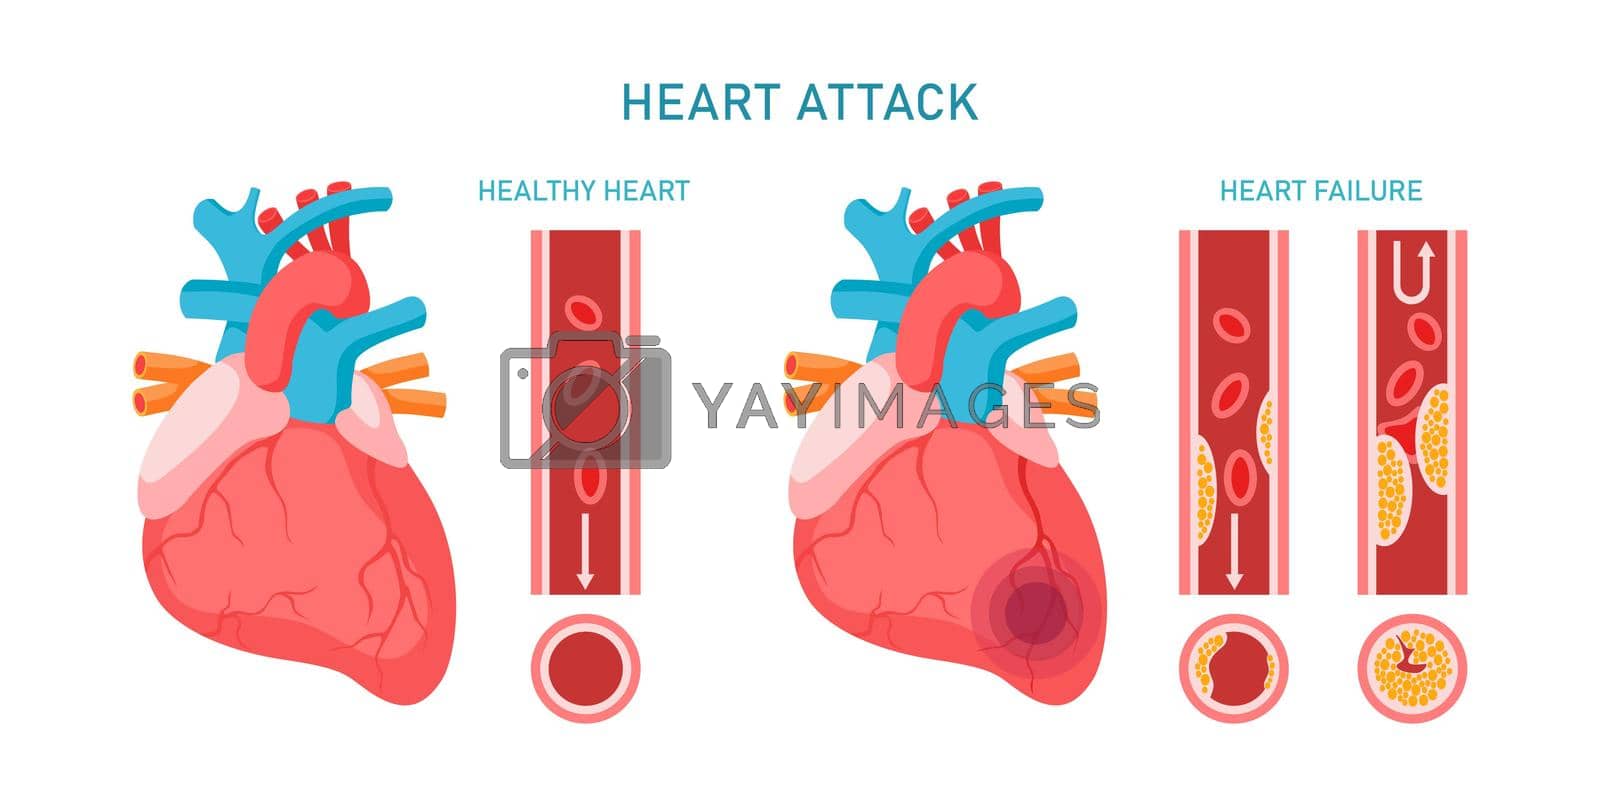 Royalty free image of Heart attack and cardiovascular diseases infographic. Healhty and failure hearts, atherosclerosis symptoms and diagnosis. Flat vector illustration. Design for medicine, treatment, health care concept by jatmikaV